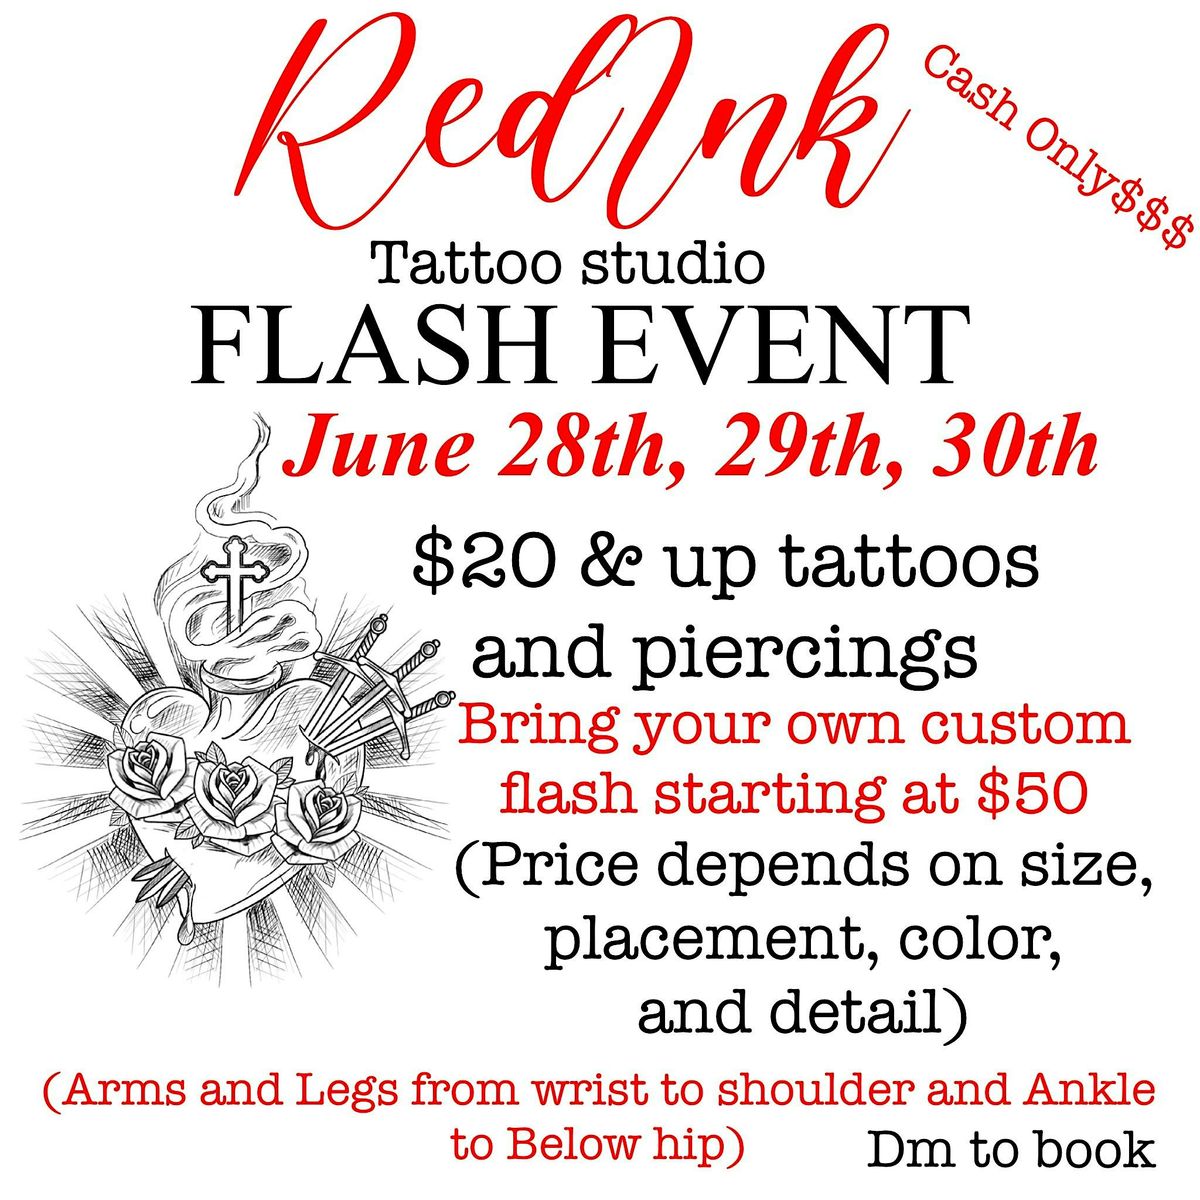 FLASH $20 $35 AND UP TATTOOS AND PIERCINGS JUNE 28TH, 29TH, AND 30TH